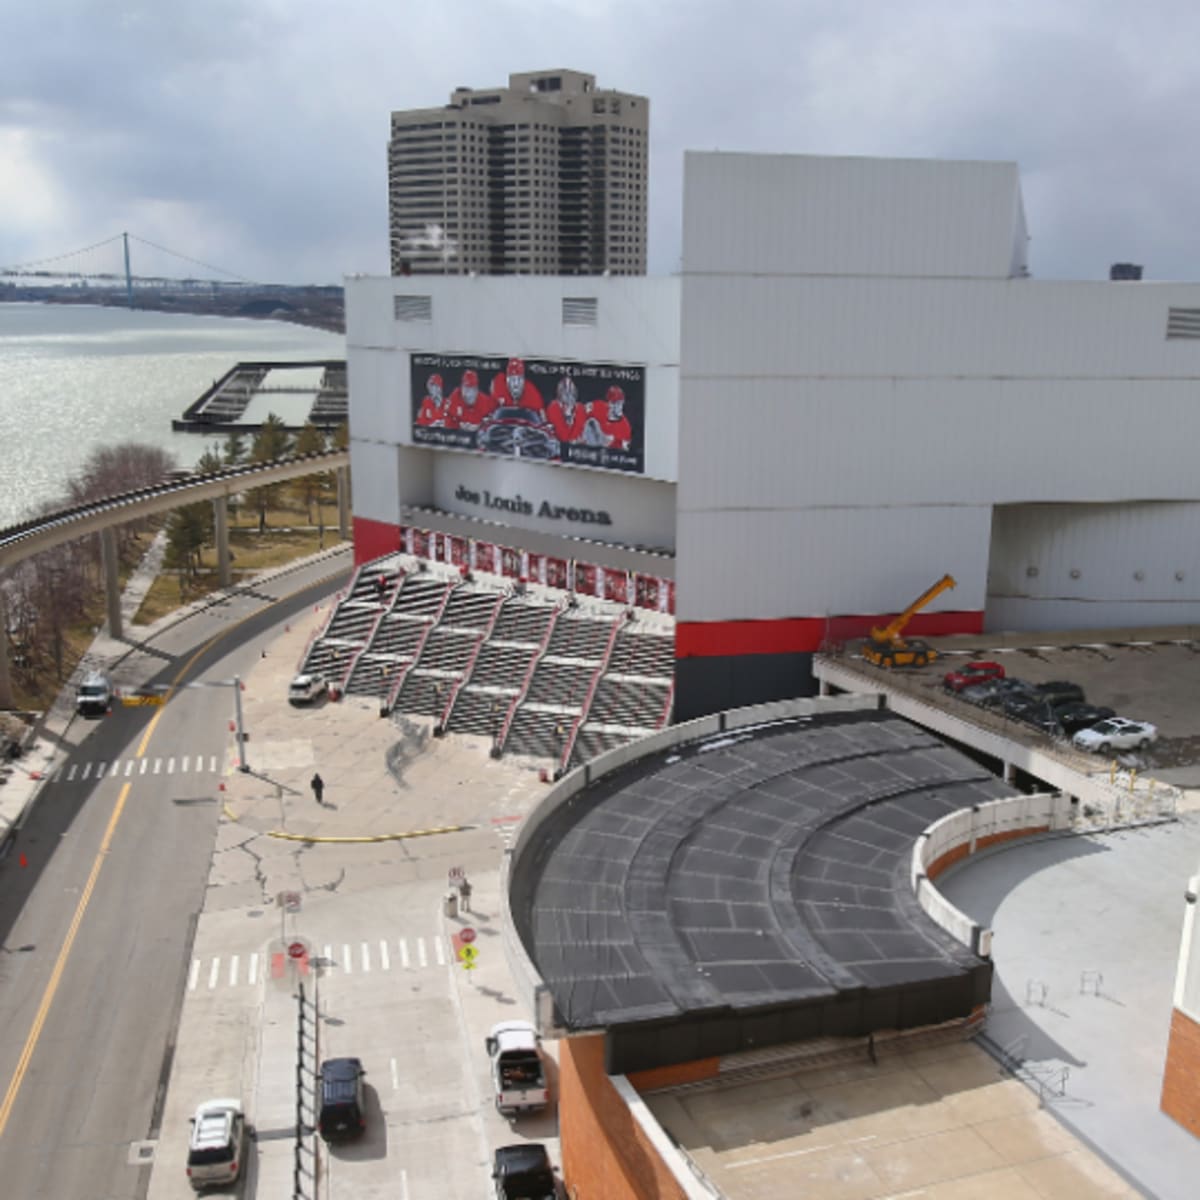 Detroit deal with creditor includes Joe Louis site